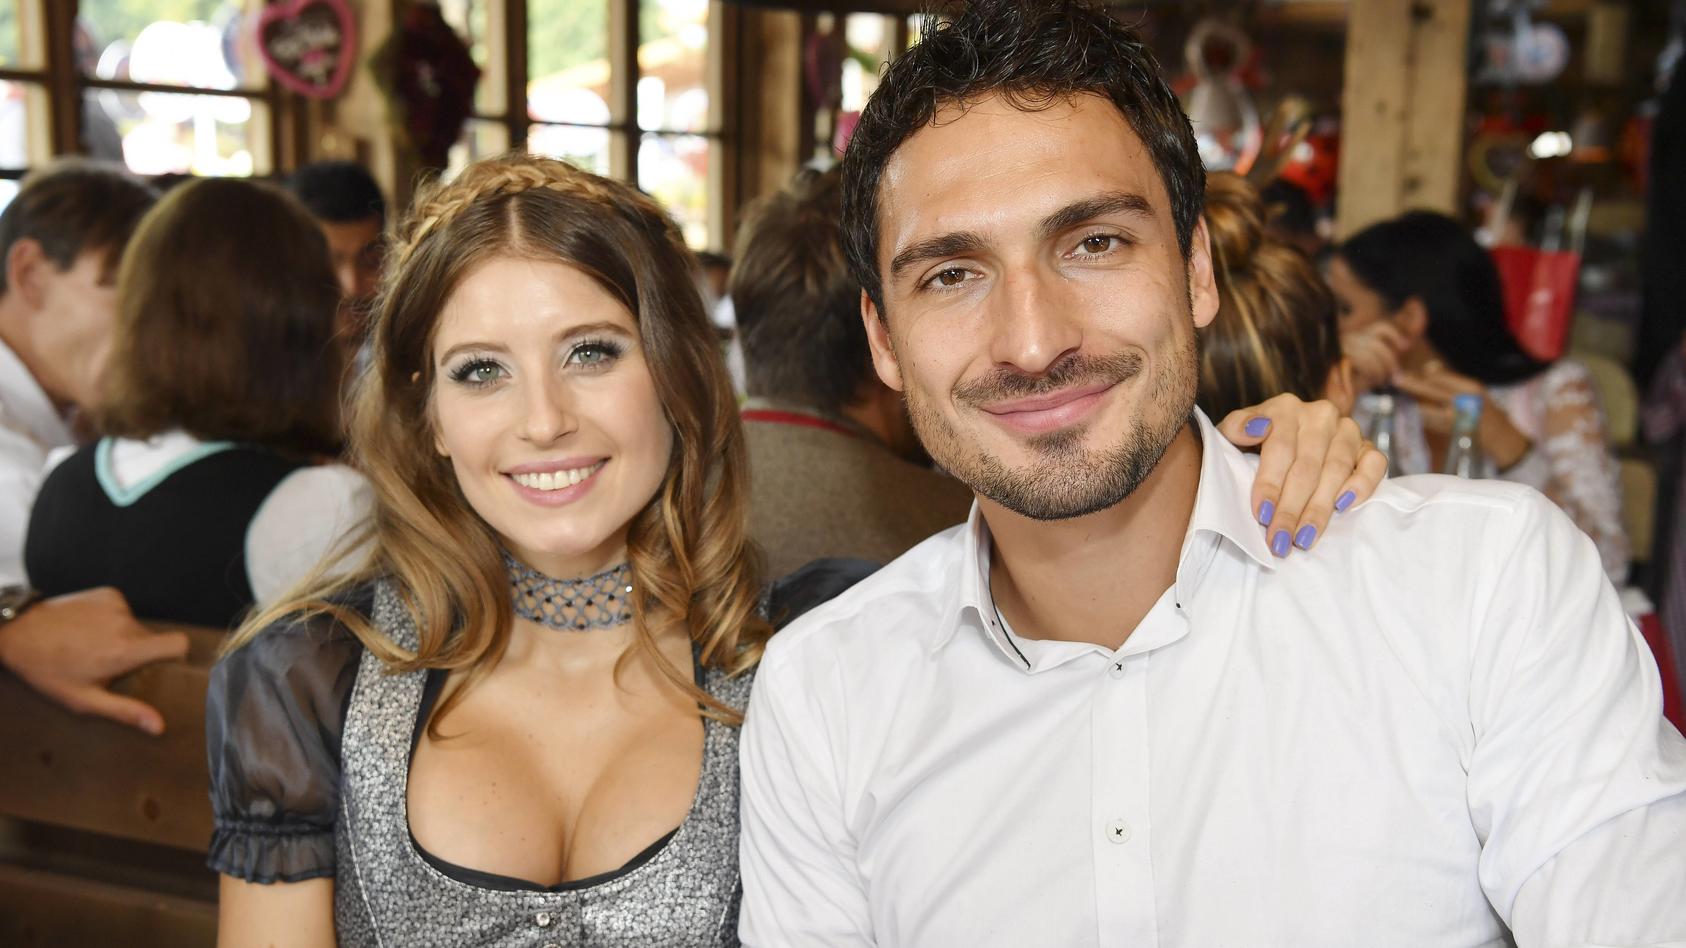 Mats Hummels und Frau Cathy auf der Wiesn am 23.9.2017 in München. Mats Hummels of FC Bayern Muenchen and his wife Cathy attend the Oktoberfest beer festival at Kaefer Wiesenschaenke tent at Theresienwiese on September 23, 2017 in Munich, Germany. Ma